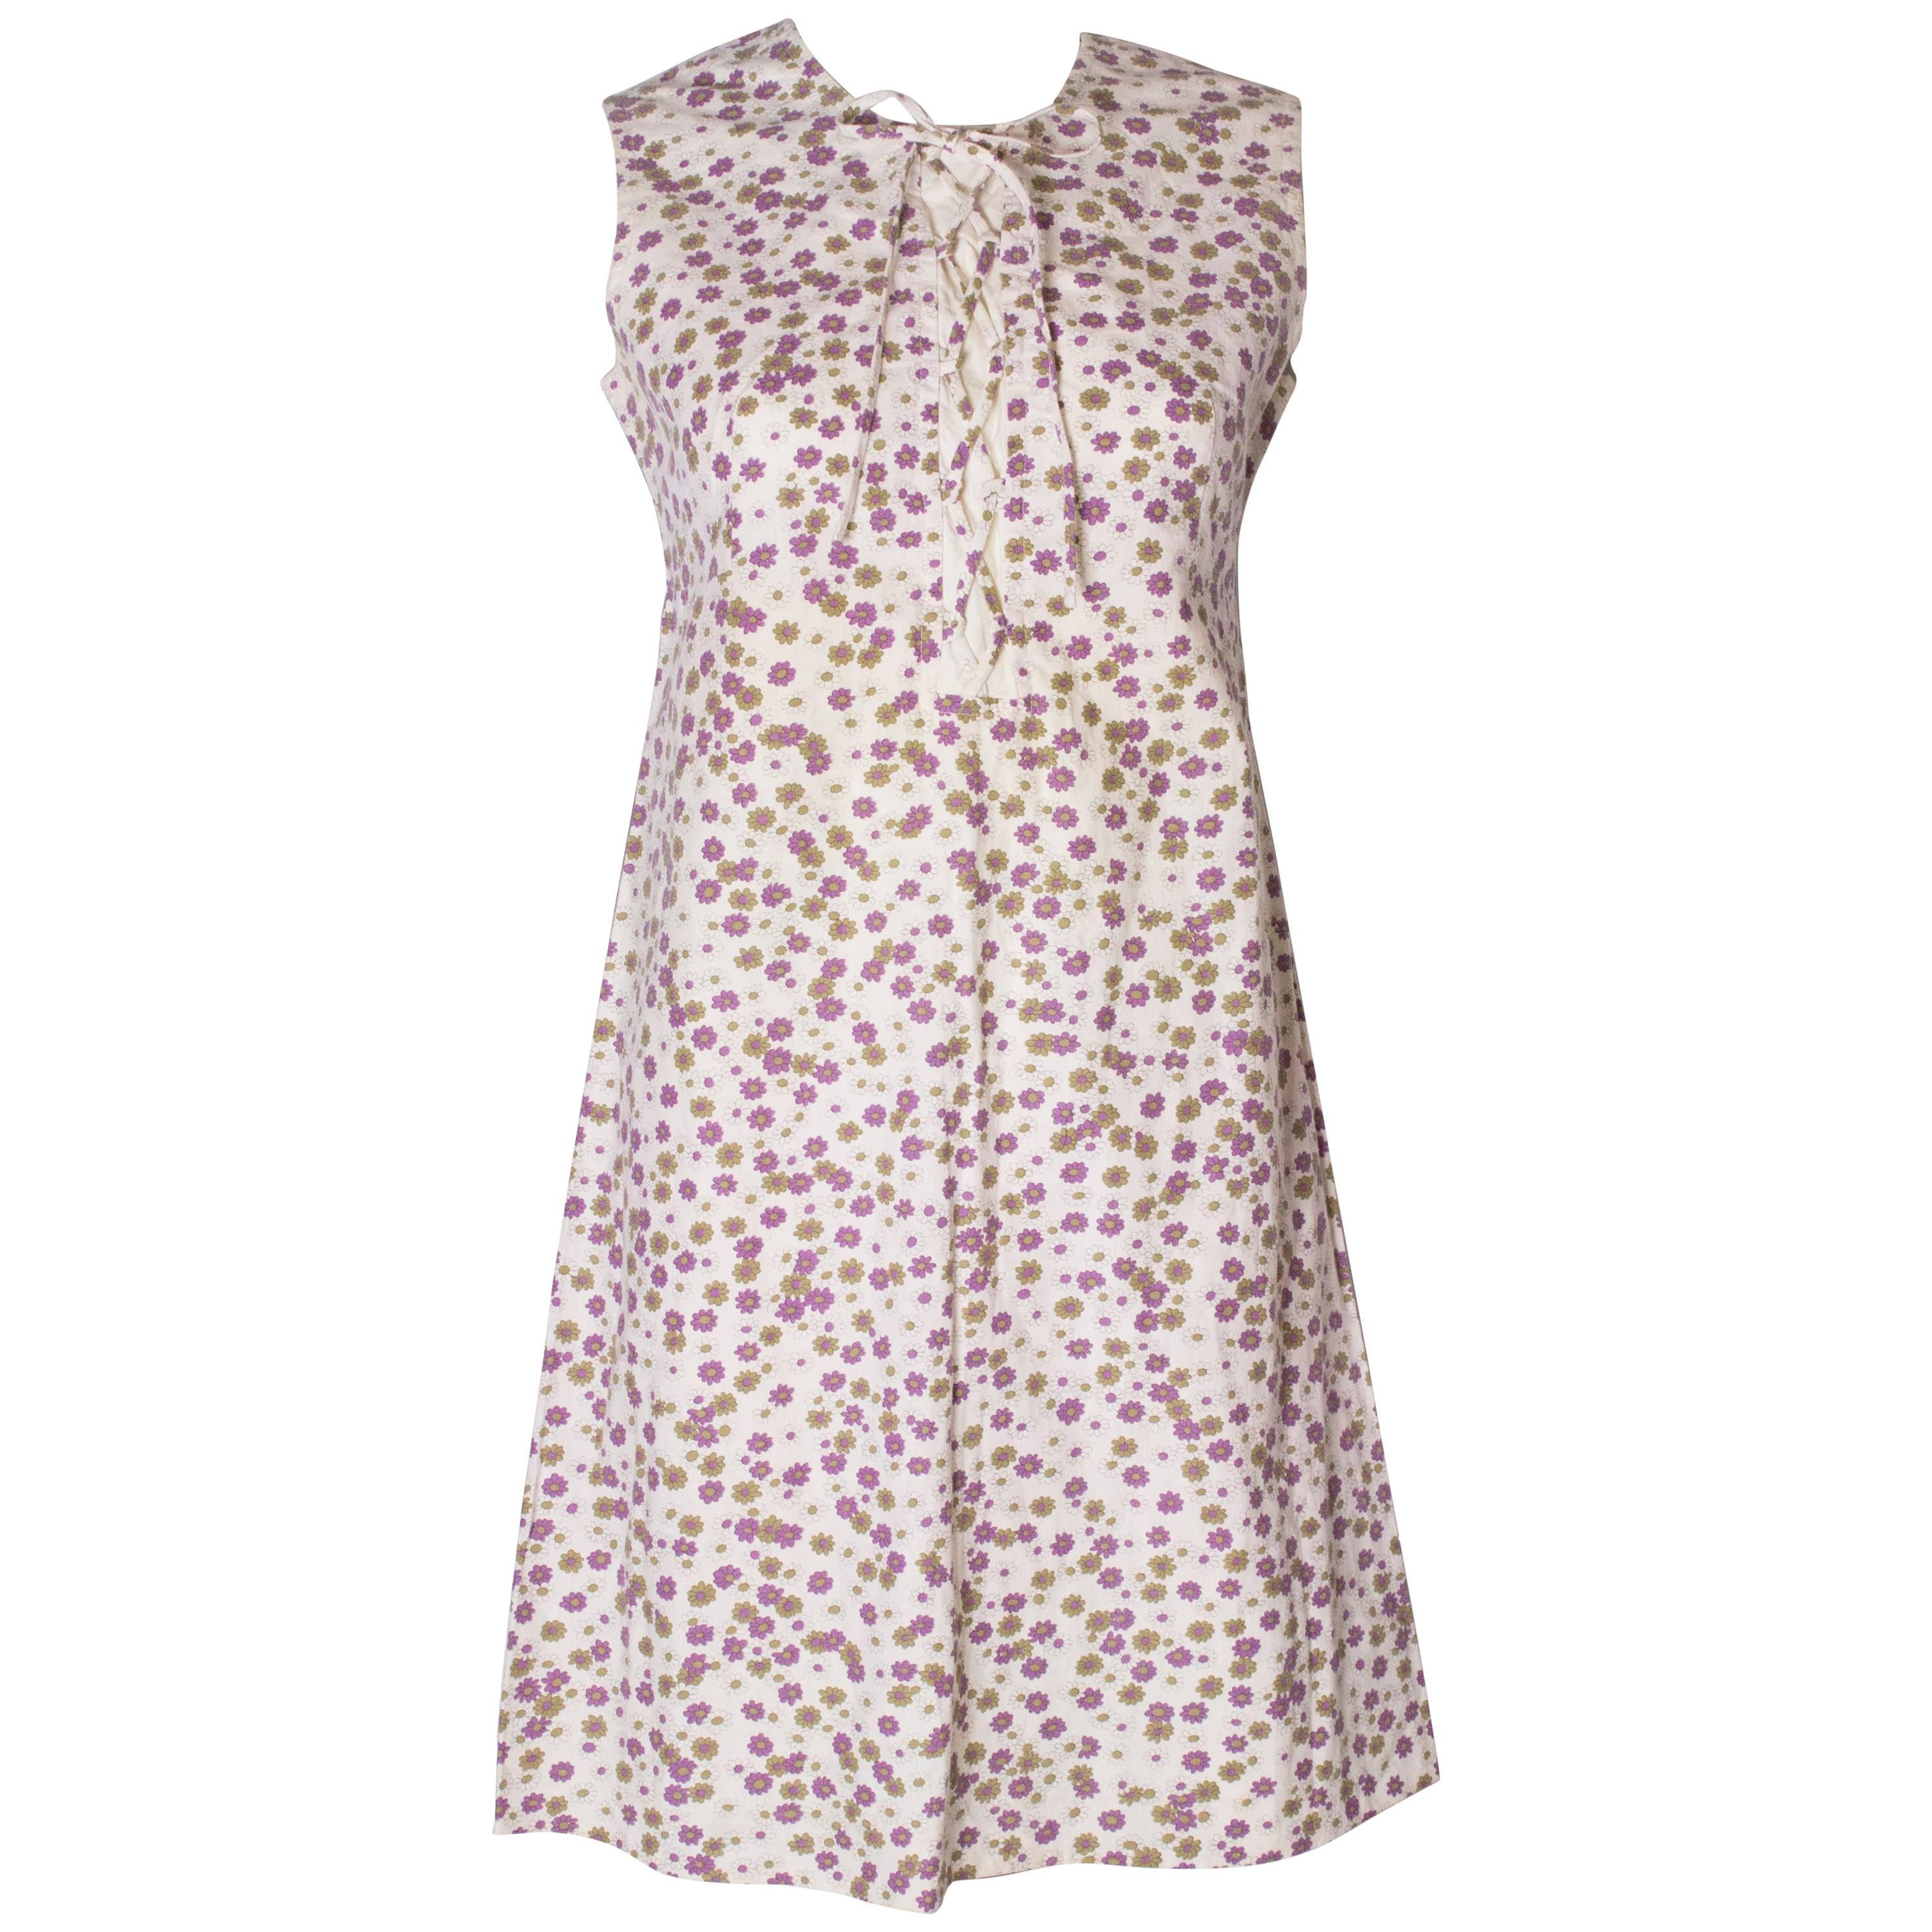 A Vintage 1960s floral print cotton day dress by Peter Robinson For Sale